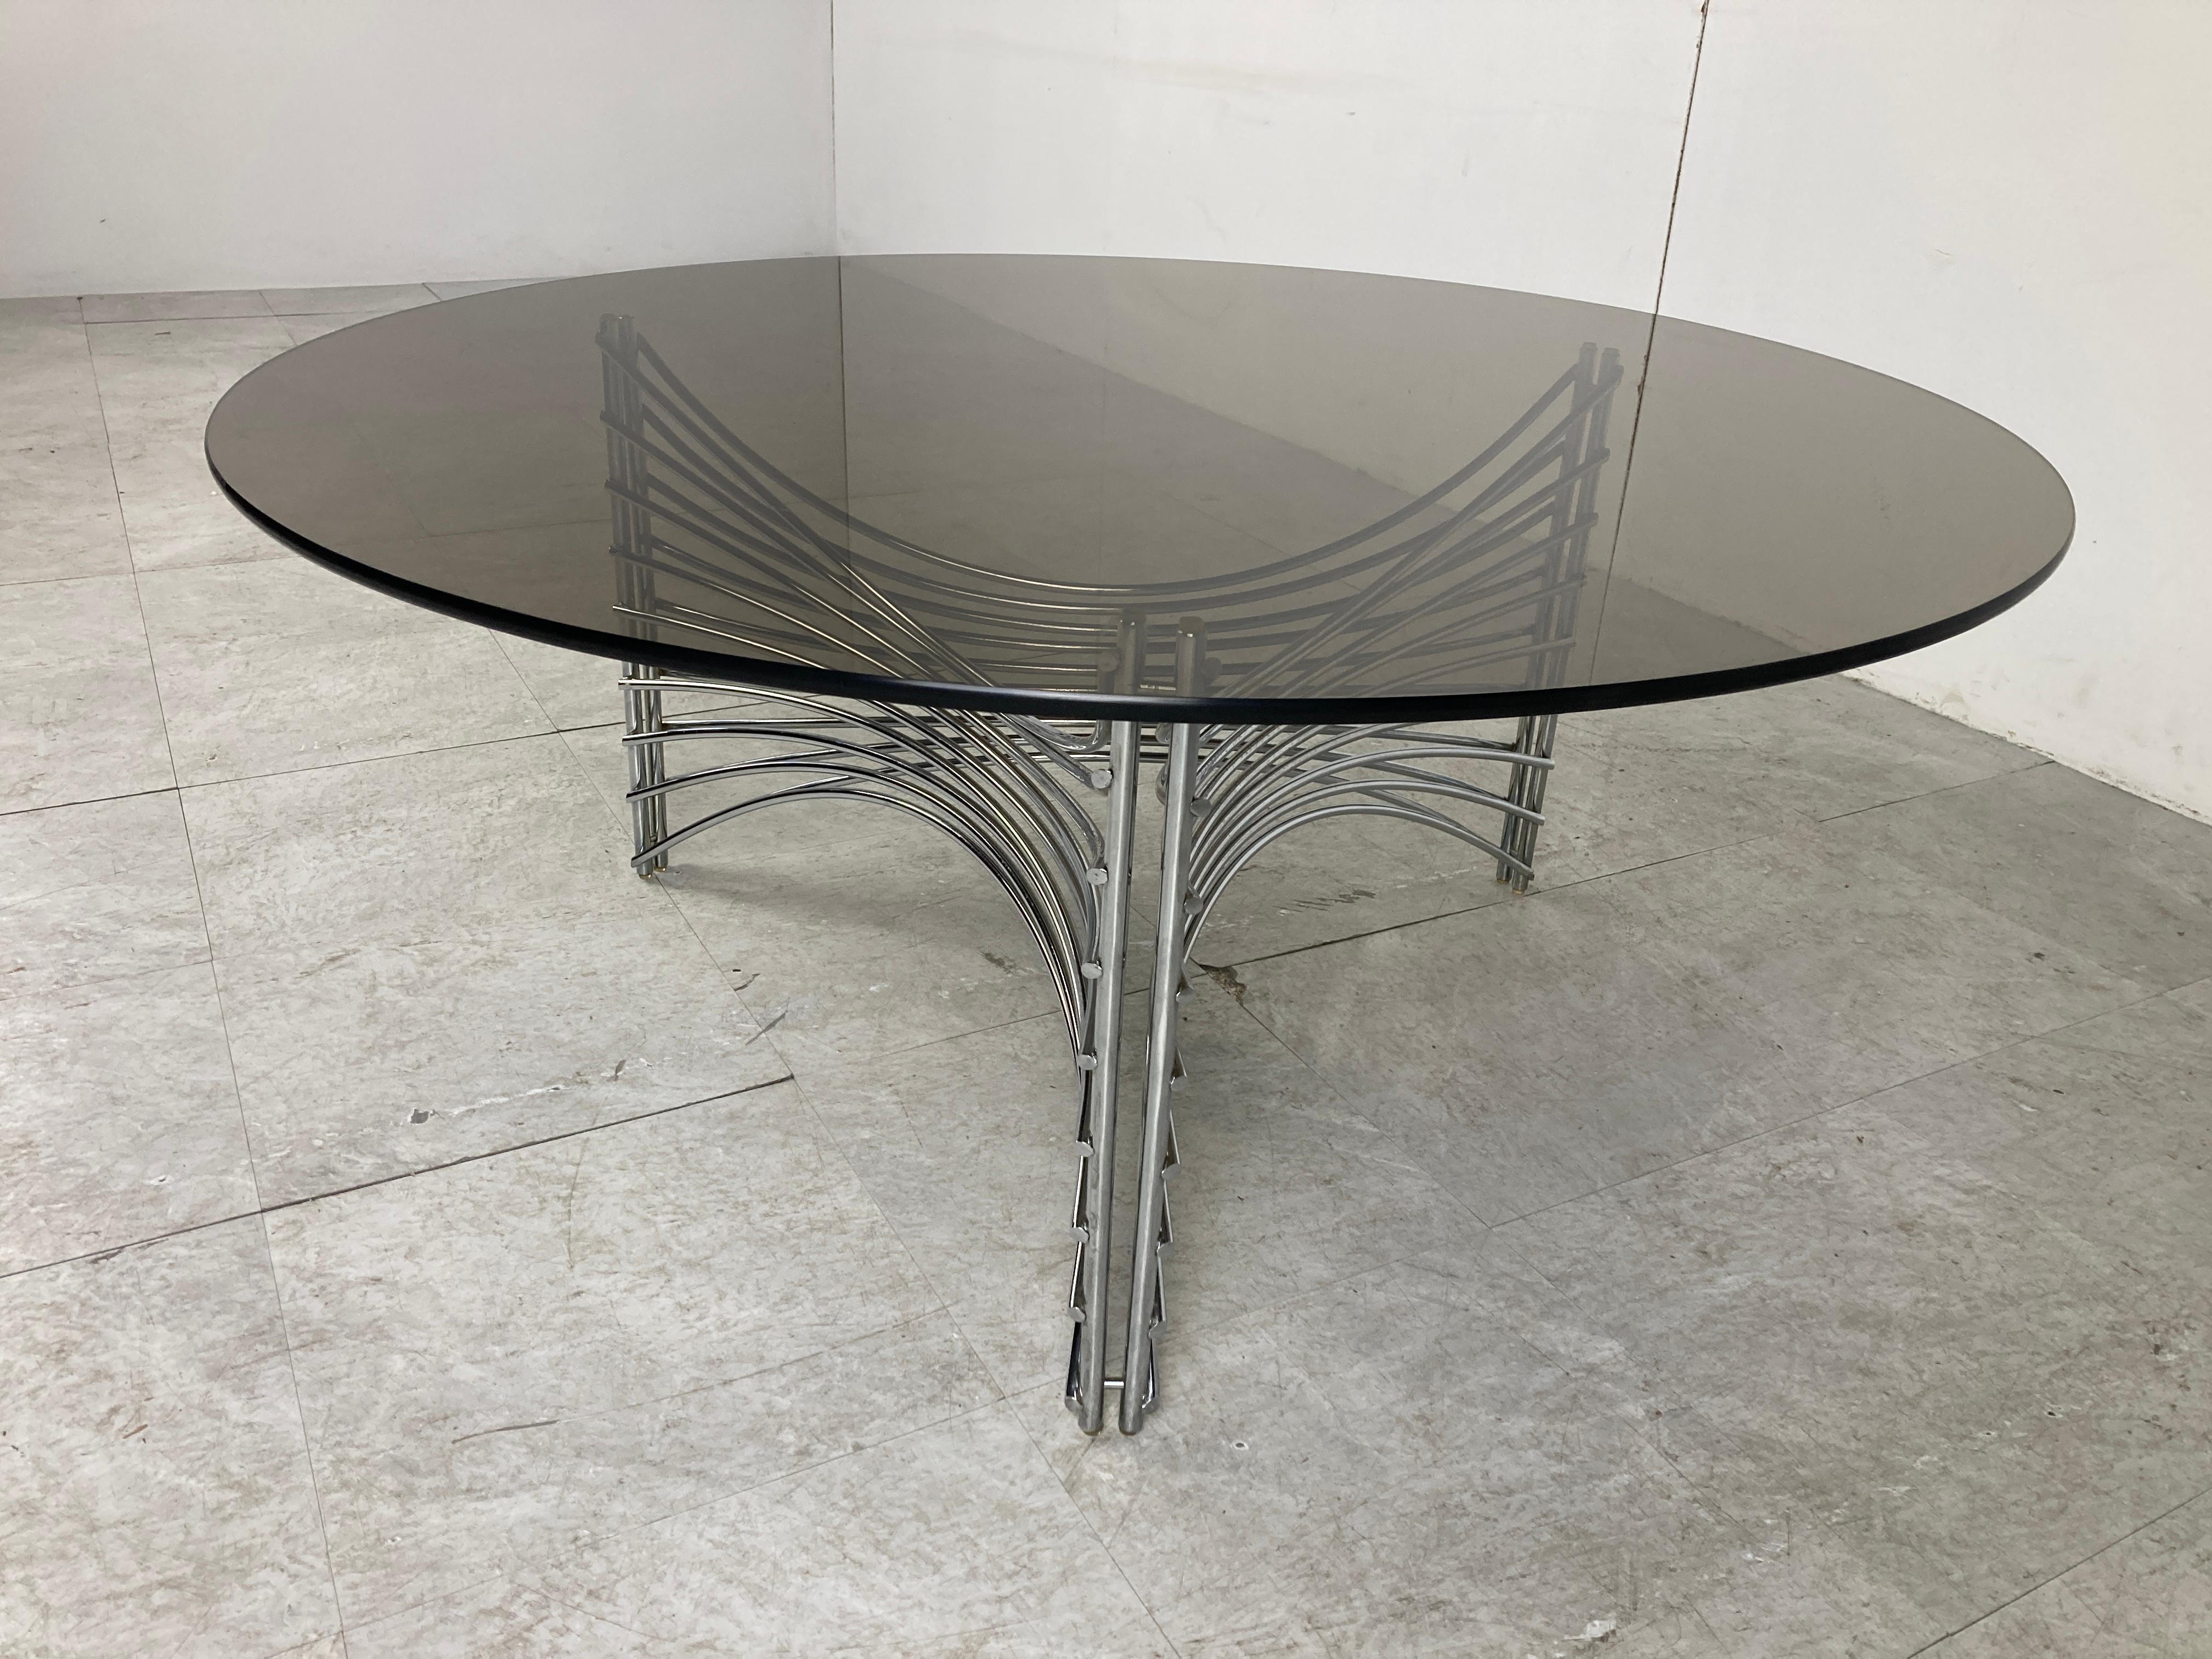 Space age era coffee table with a chromed metal wire base and a round smoked glass top.

1970s - Germany

Good condition

Dimensions:
height: 42 cm / 16.53